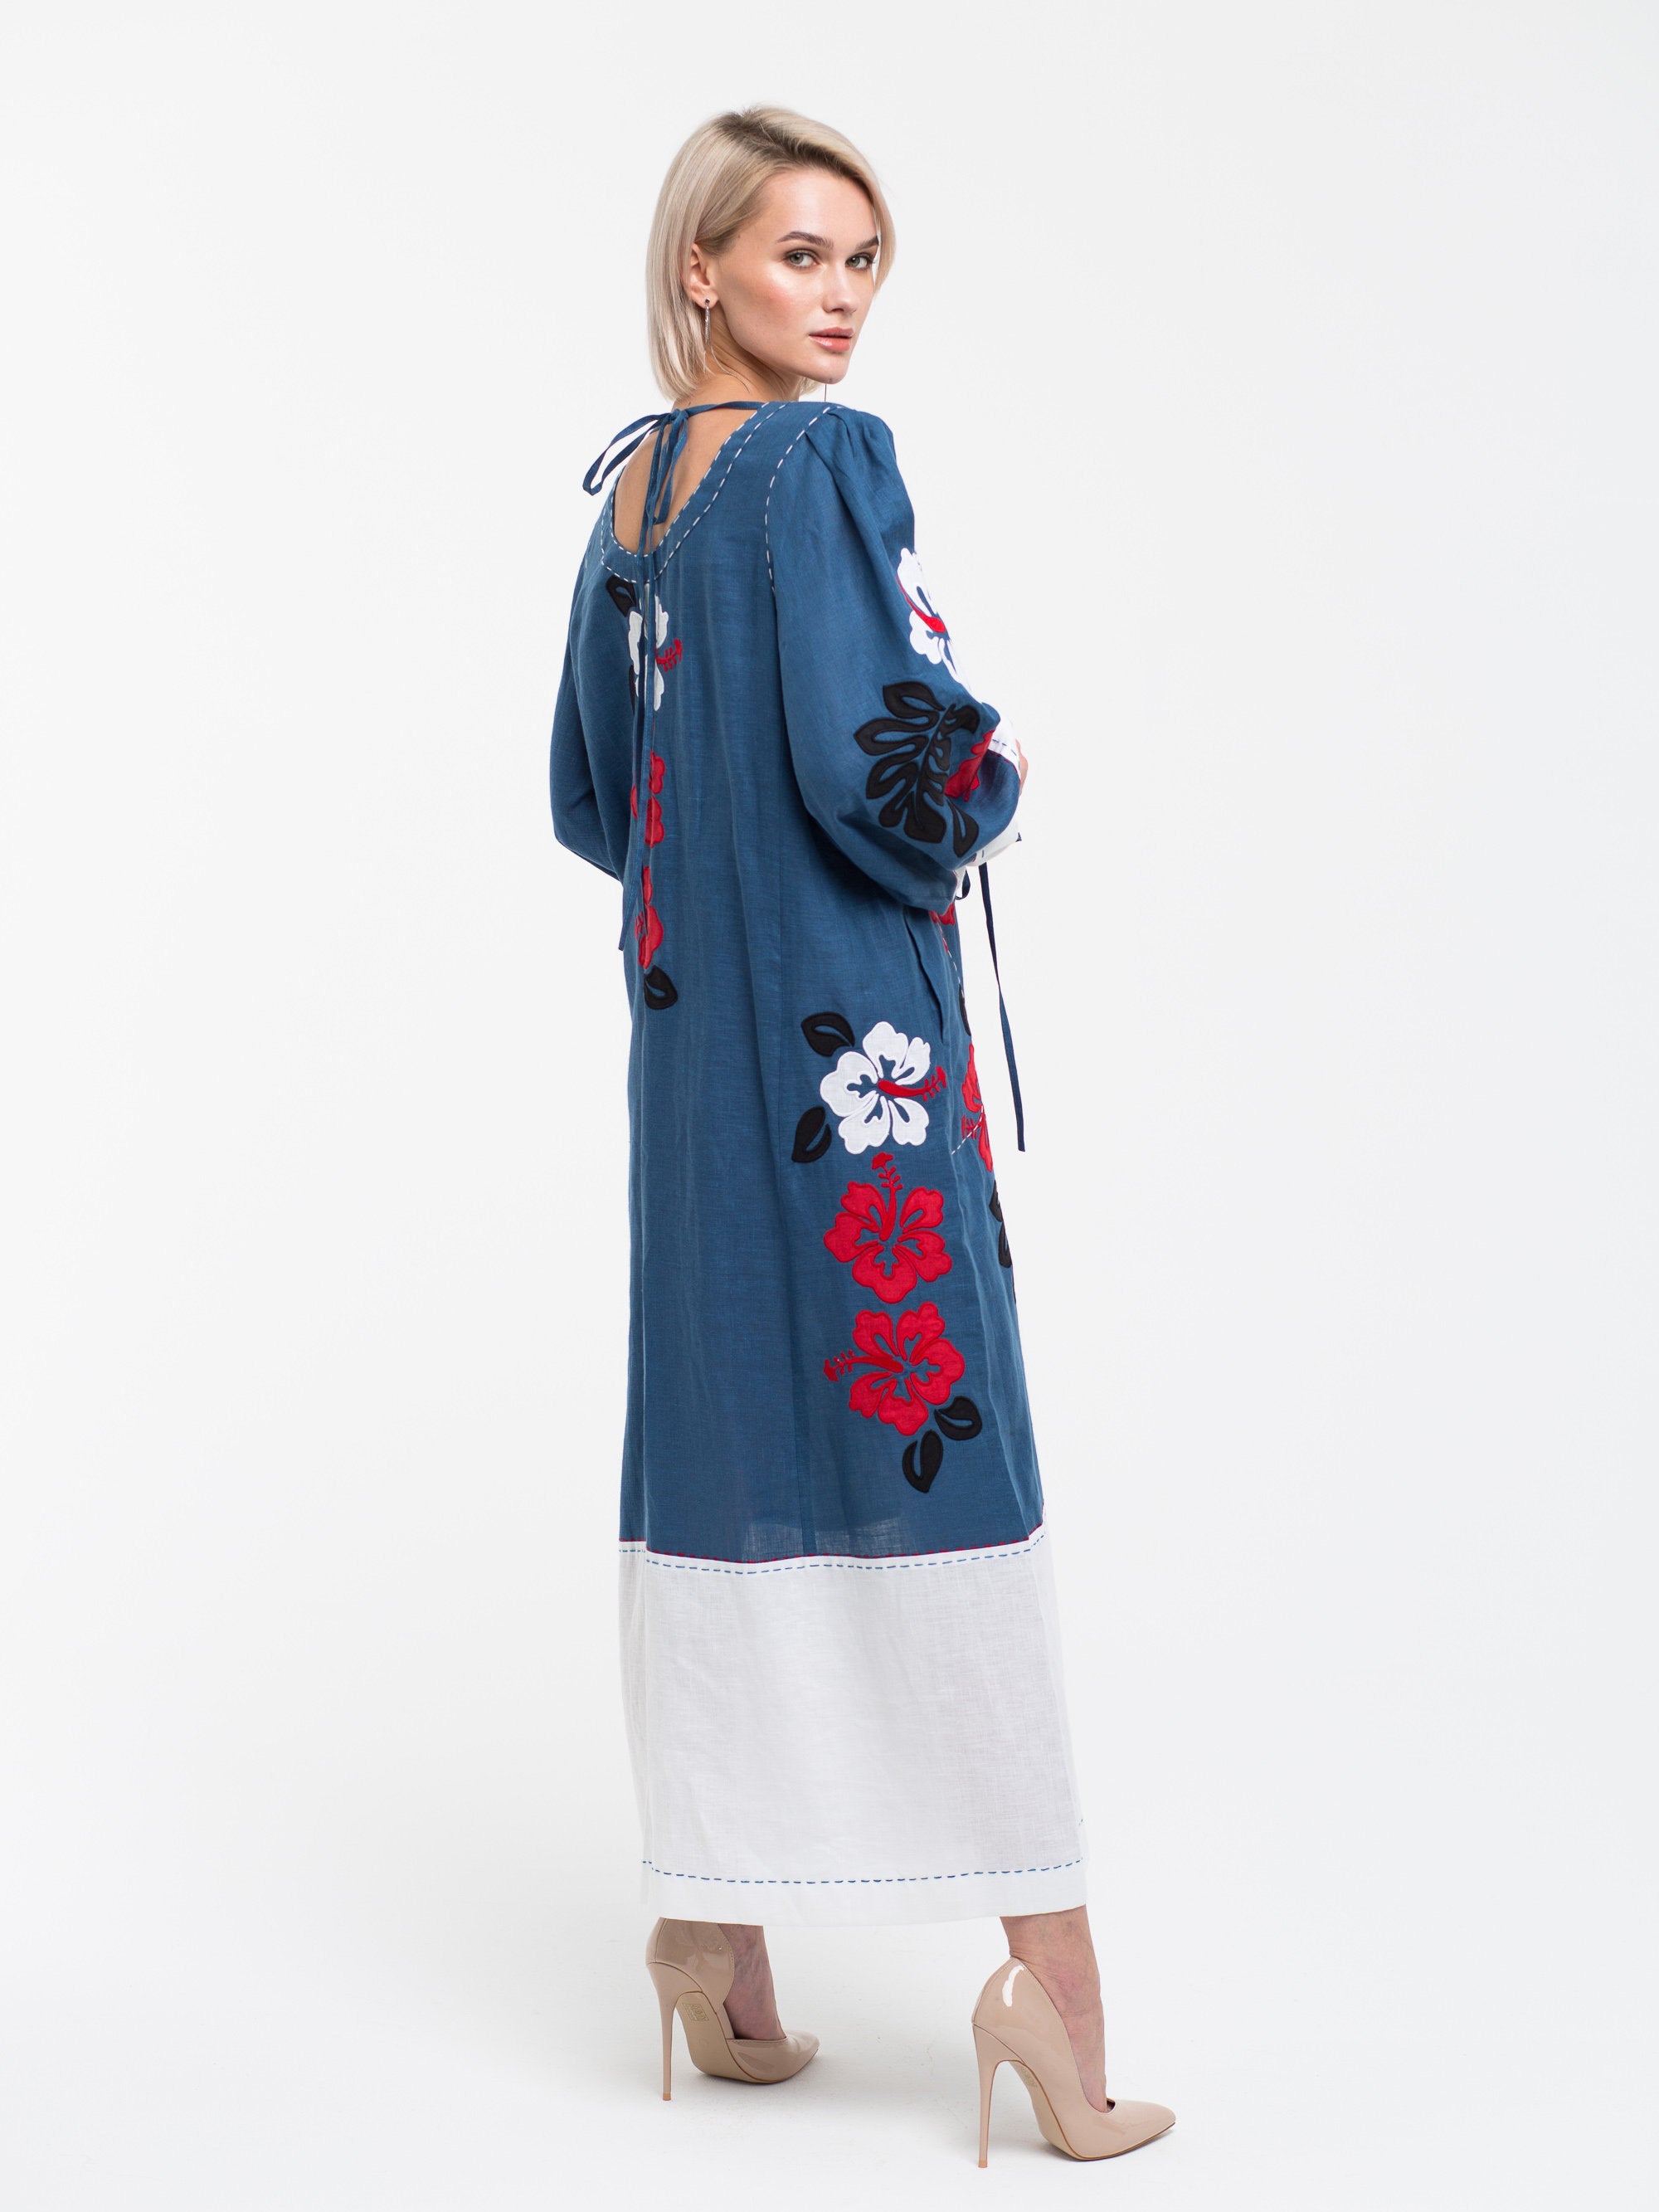 Hawaii embroidered dress Applique linen kaftan with tie cuffs and V-back Fashion resort bridal dress